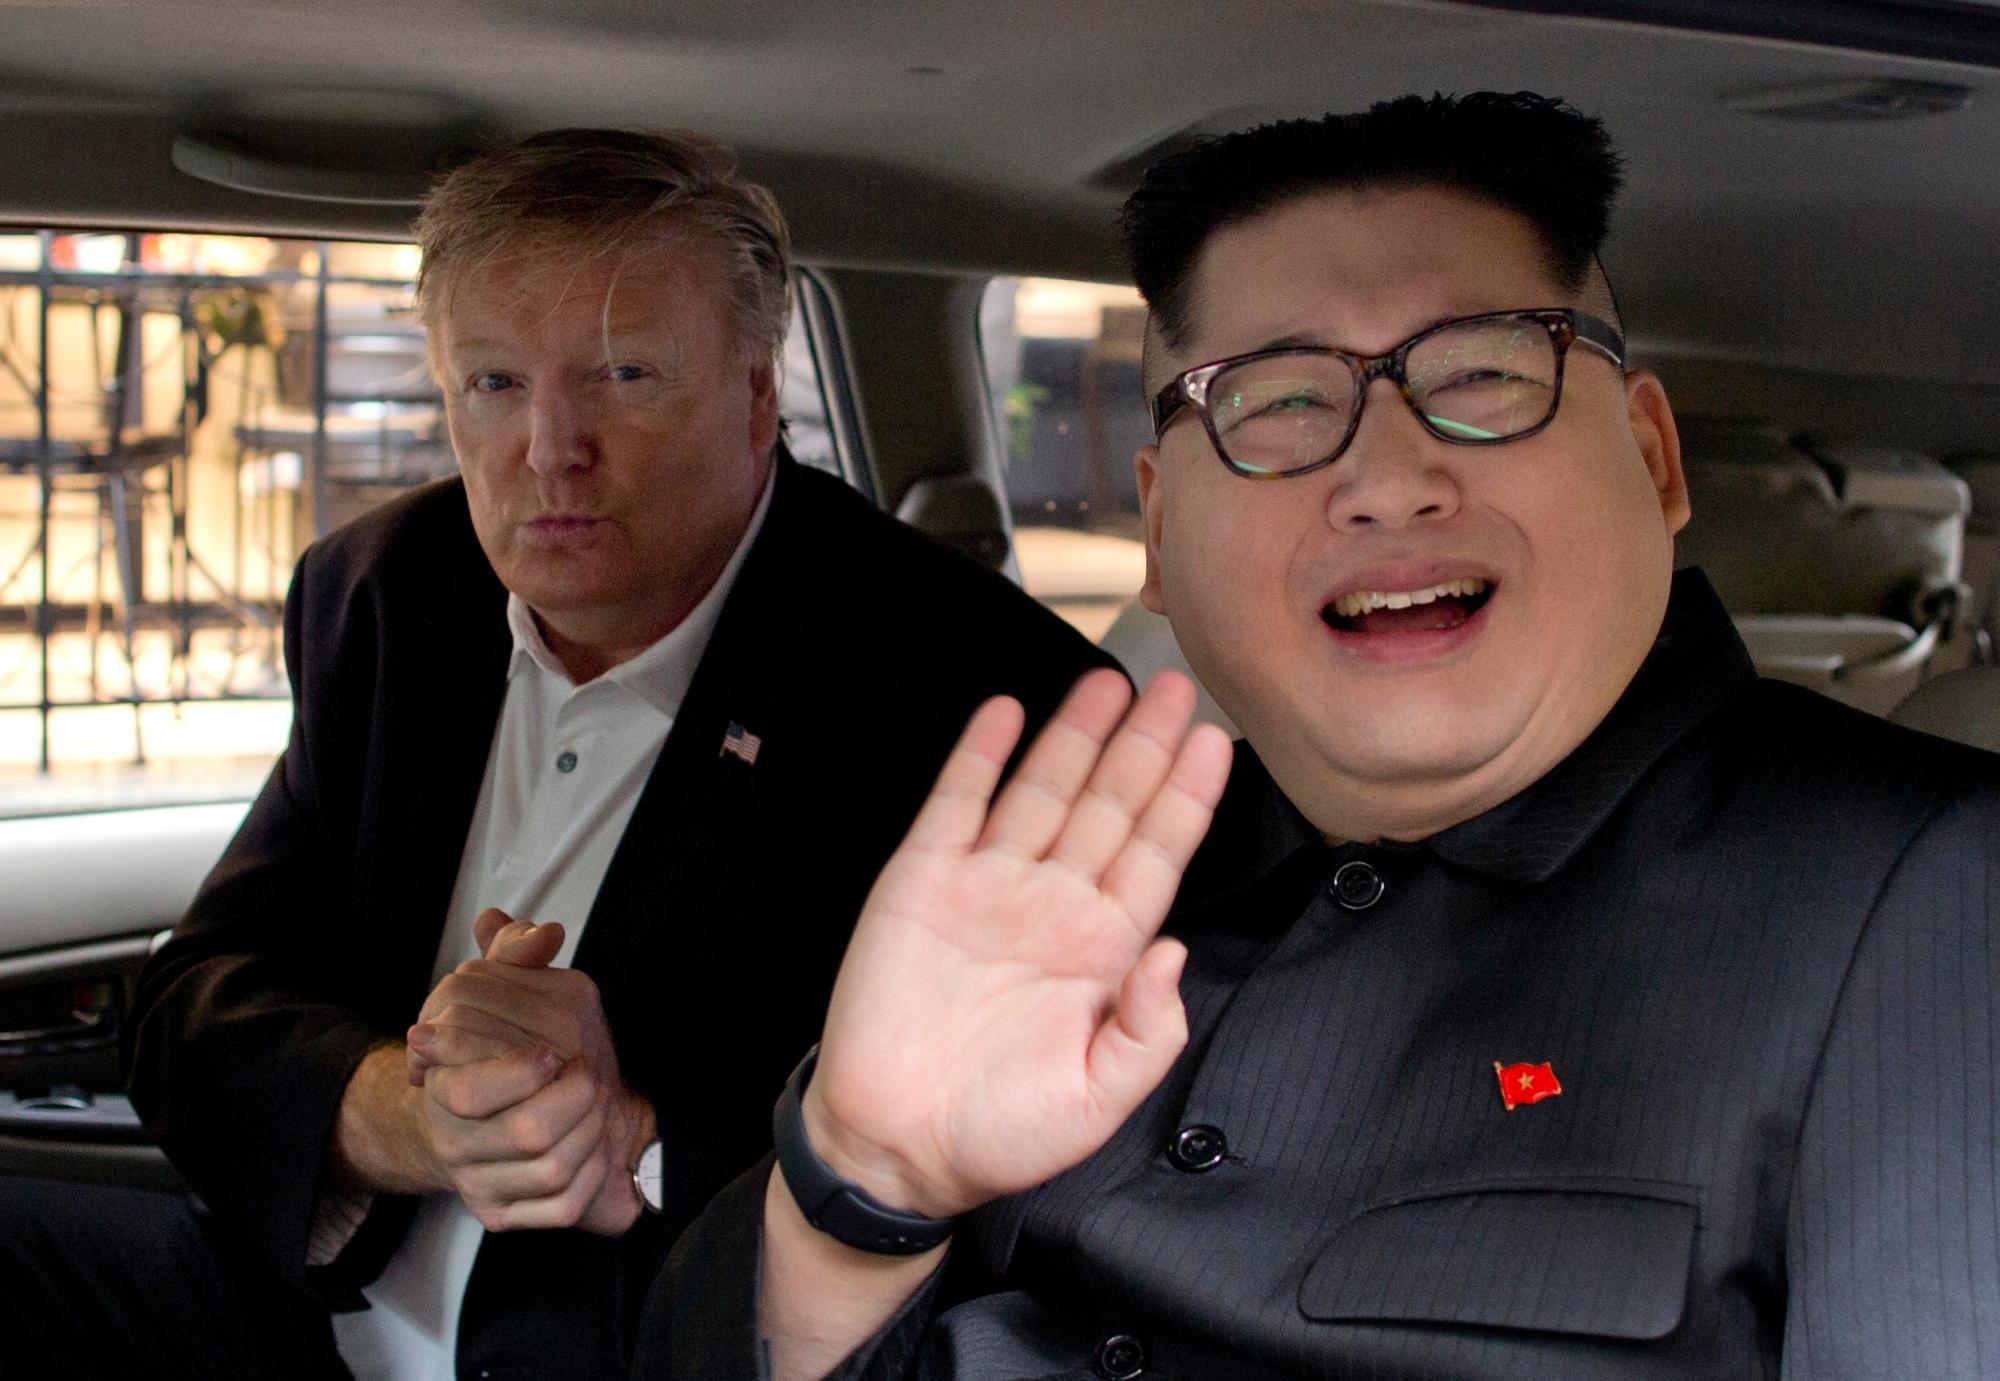 Howard X, right, an Australian impersonating North Korean leader Kim Jong Un, waves as Russel White, a U.S. President Donald Trump impersonator, gestures from a car outside La Paix hotel in Hanoi, Vietnam, Monday, Feb. 25, 2019. Take the reaction to the two impersonators who'd been posing for pictures with curious onlookers ahead of the second U.S.-North Korean summit. (AP Photo/Gemunu Amarasinghe) Trump Kim Summit